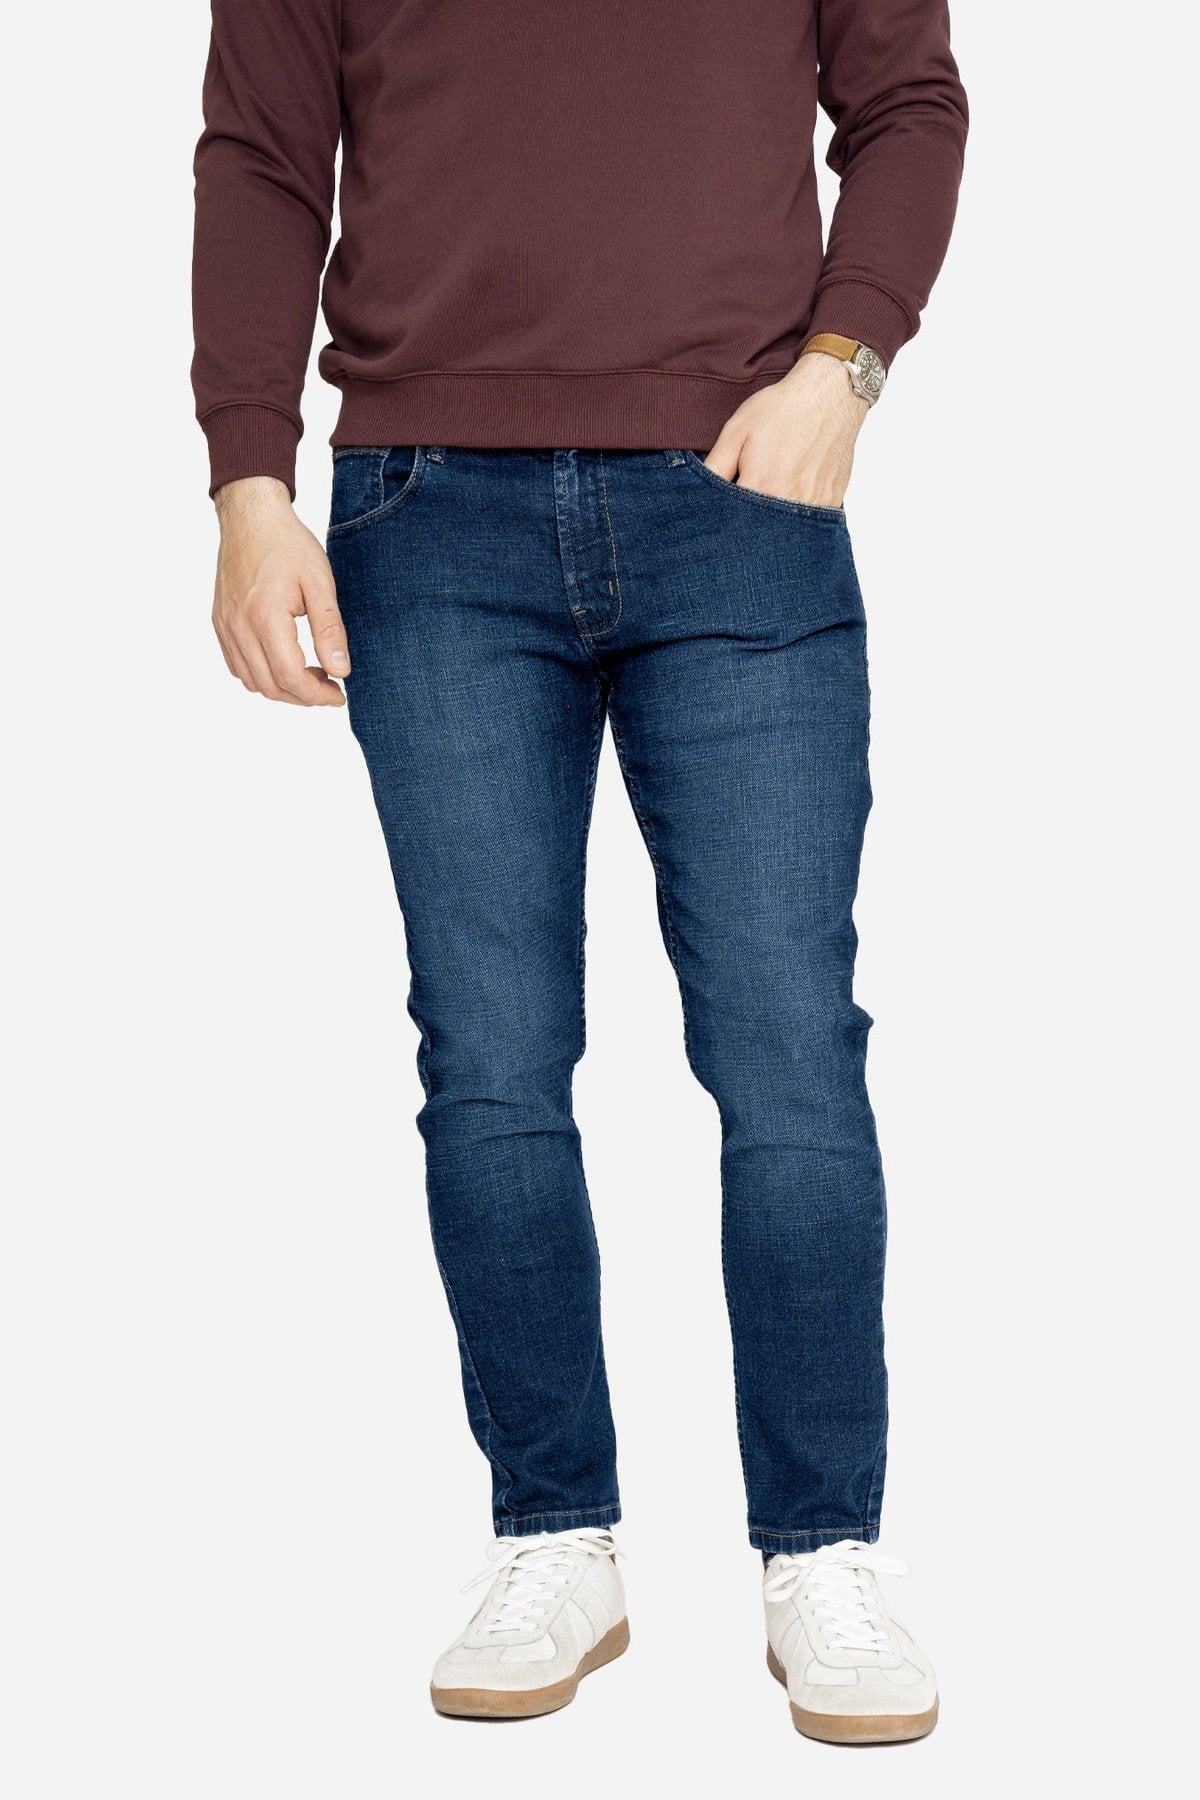 17+ Places to Buy Short Inseam Jeans for Men [2023 Guide]